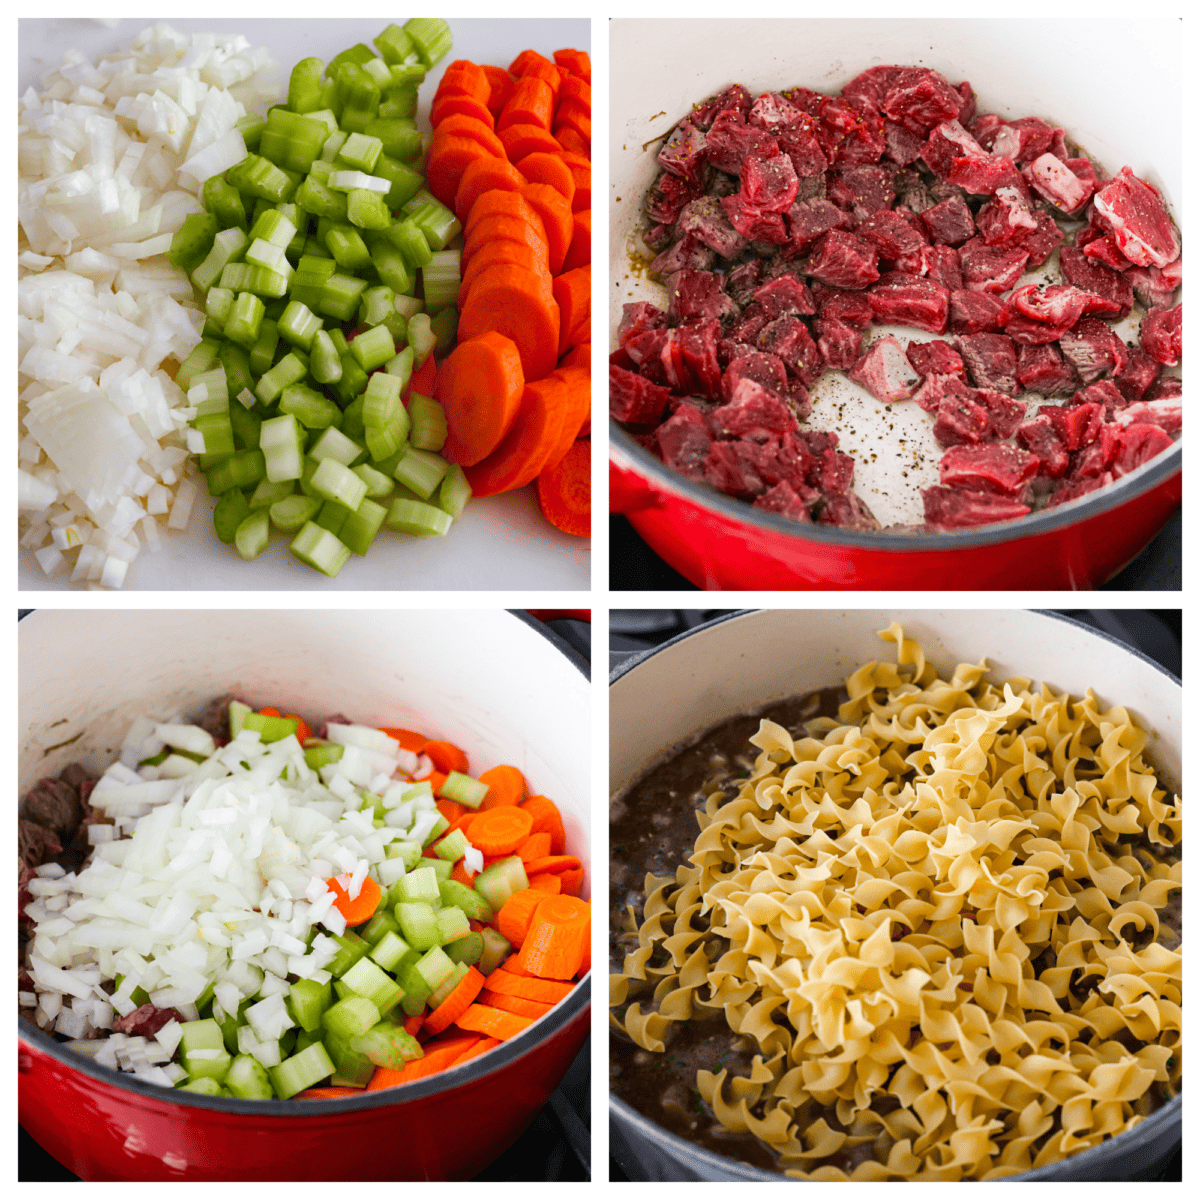 4-photo collage of vegetables, beef chunks, and noodles being added to a large pot.